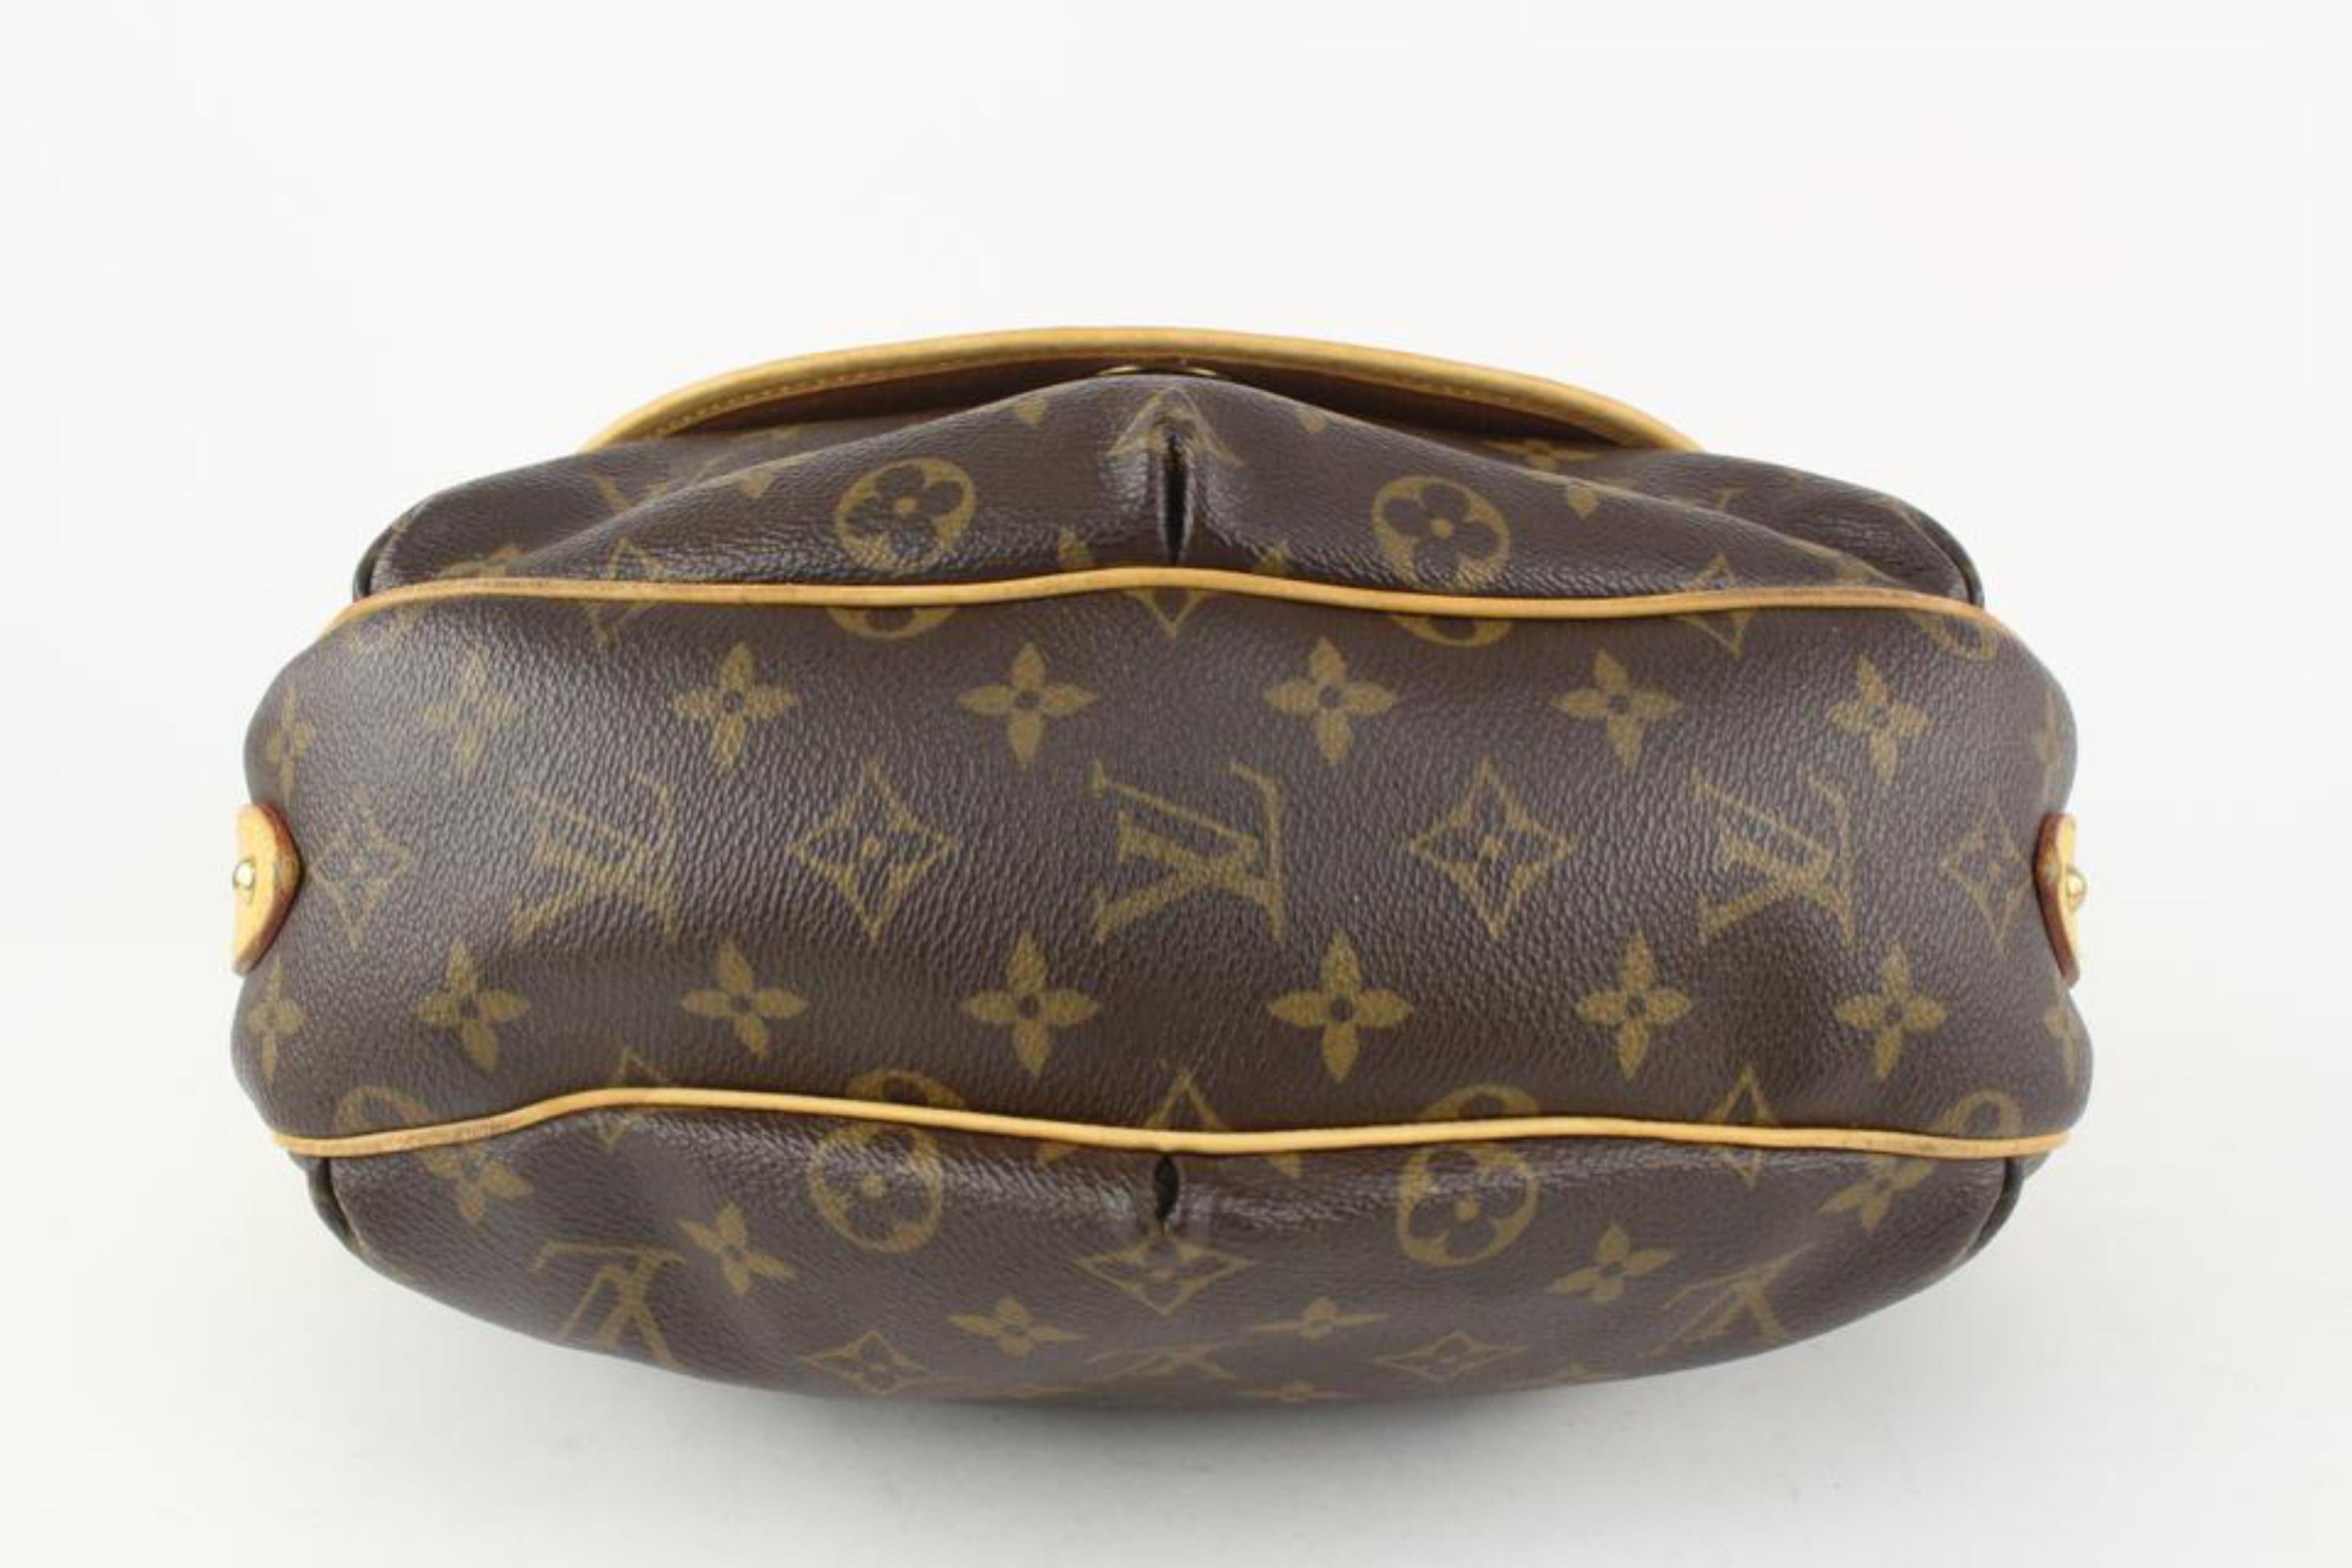 Louis Vuitton Monogram Tulum PM Hobo Shoulder bag 1115lv17 In Good Condition For Sale In Dix hills, NY